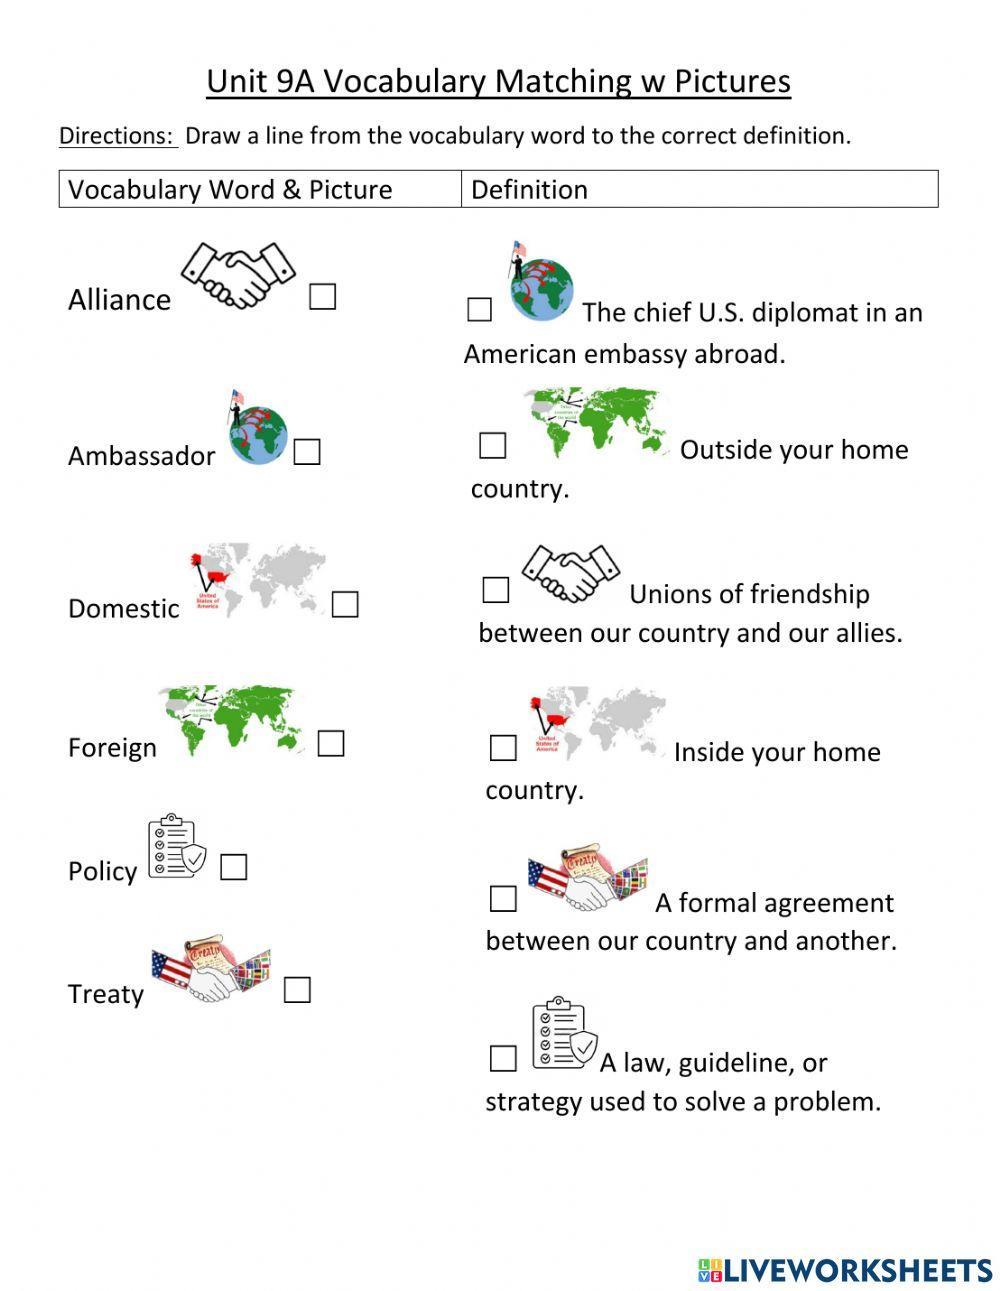 Unit 9A US Domestic and Foreign Policy Vocabulary Matching w Pictures